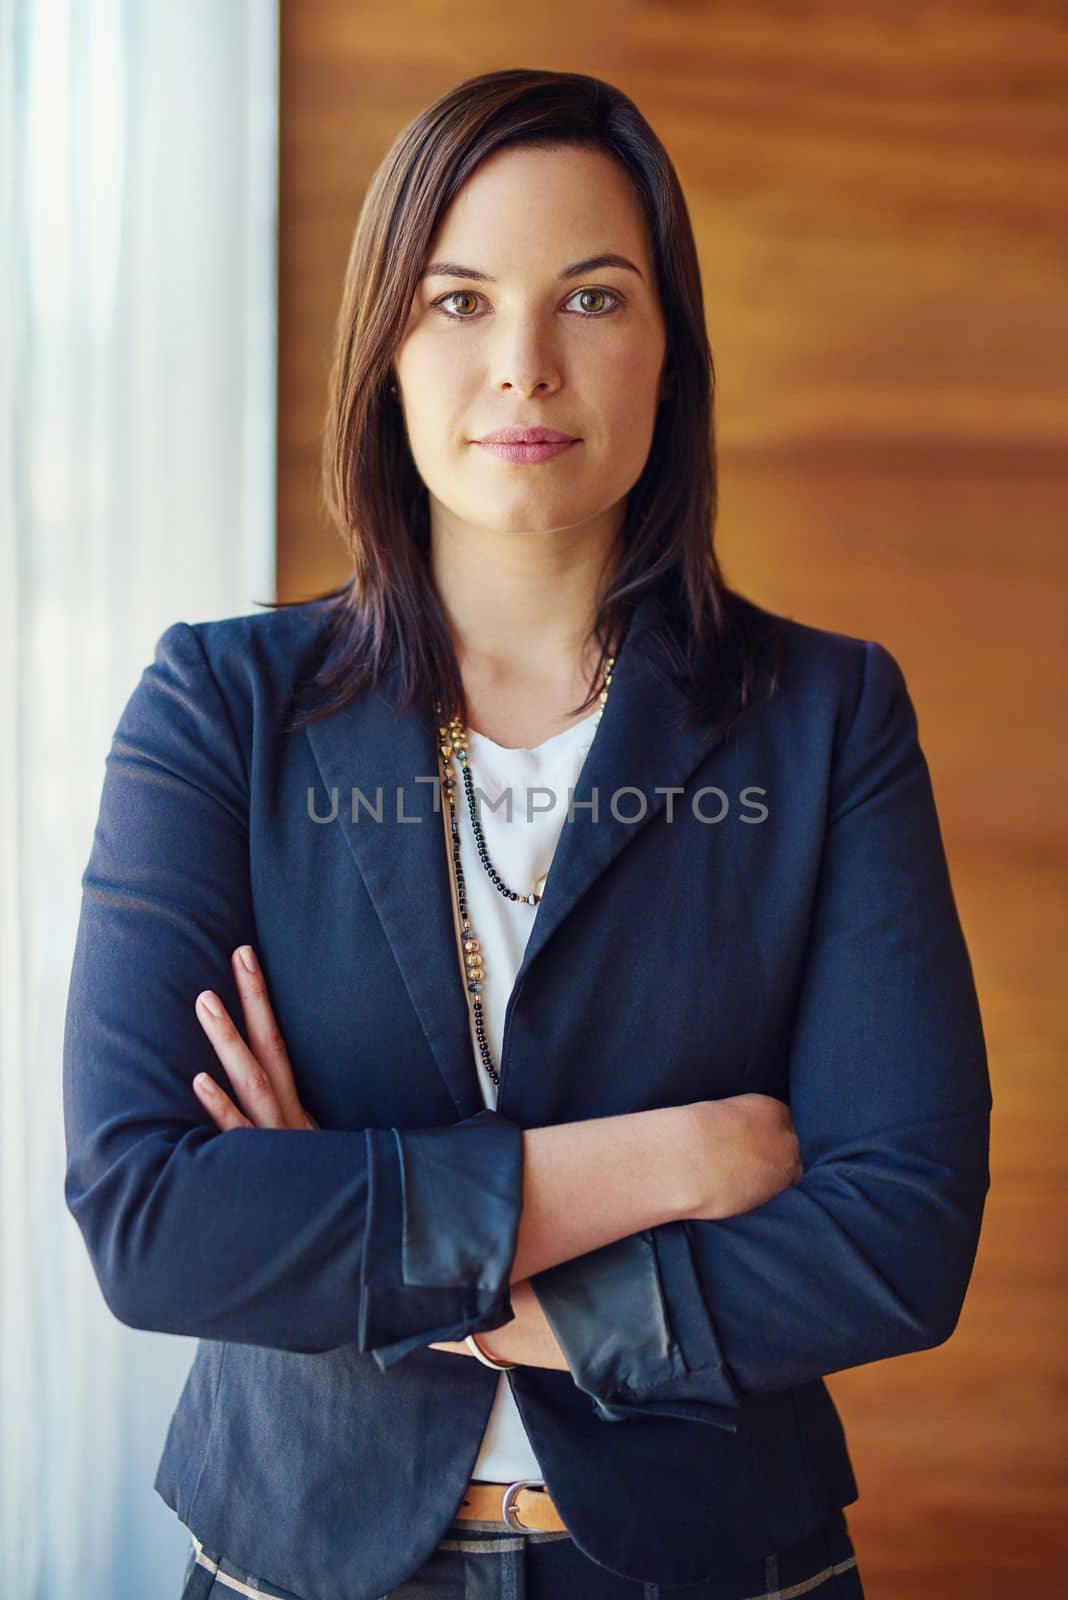 Onward and upward. Portrait of a confident businesswoman standing in her office